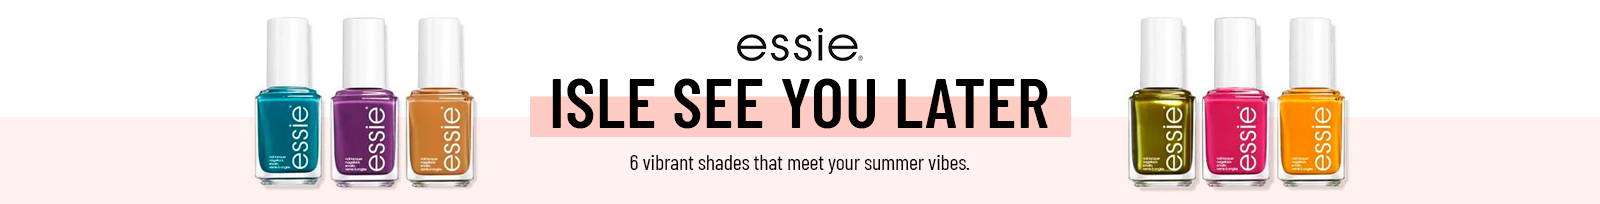 Essie Isle See You Later